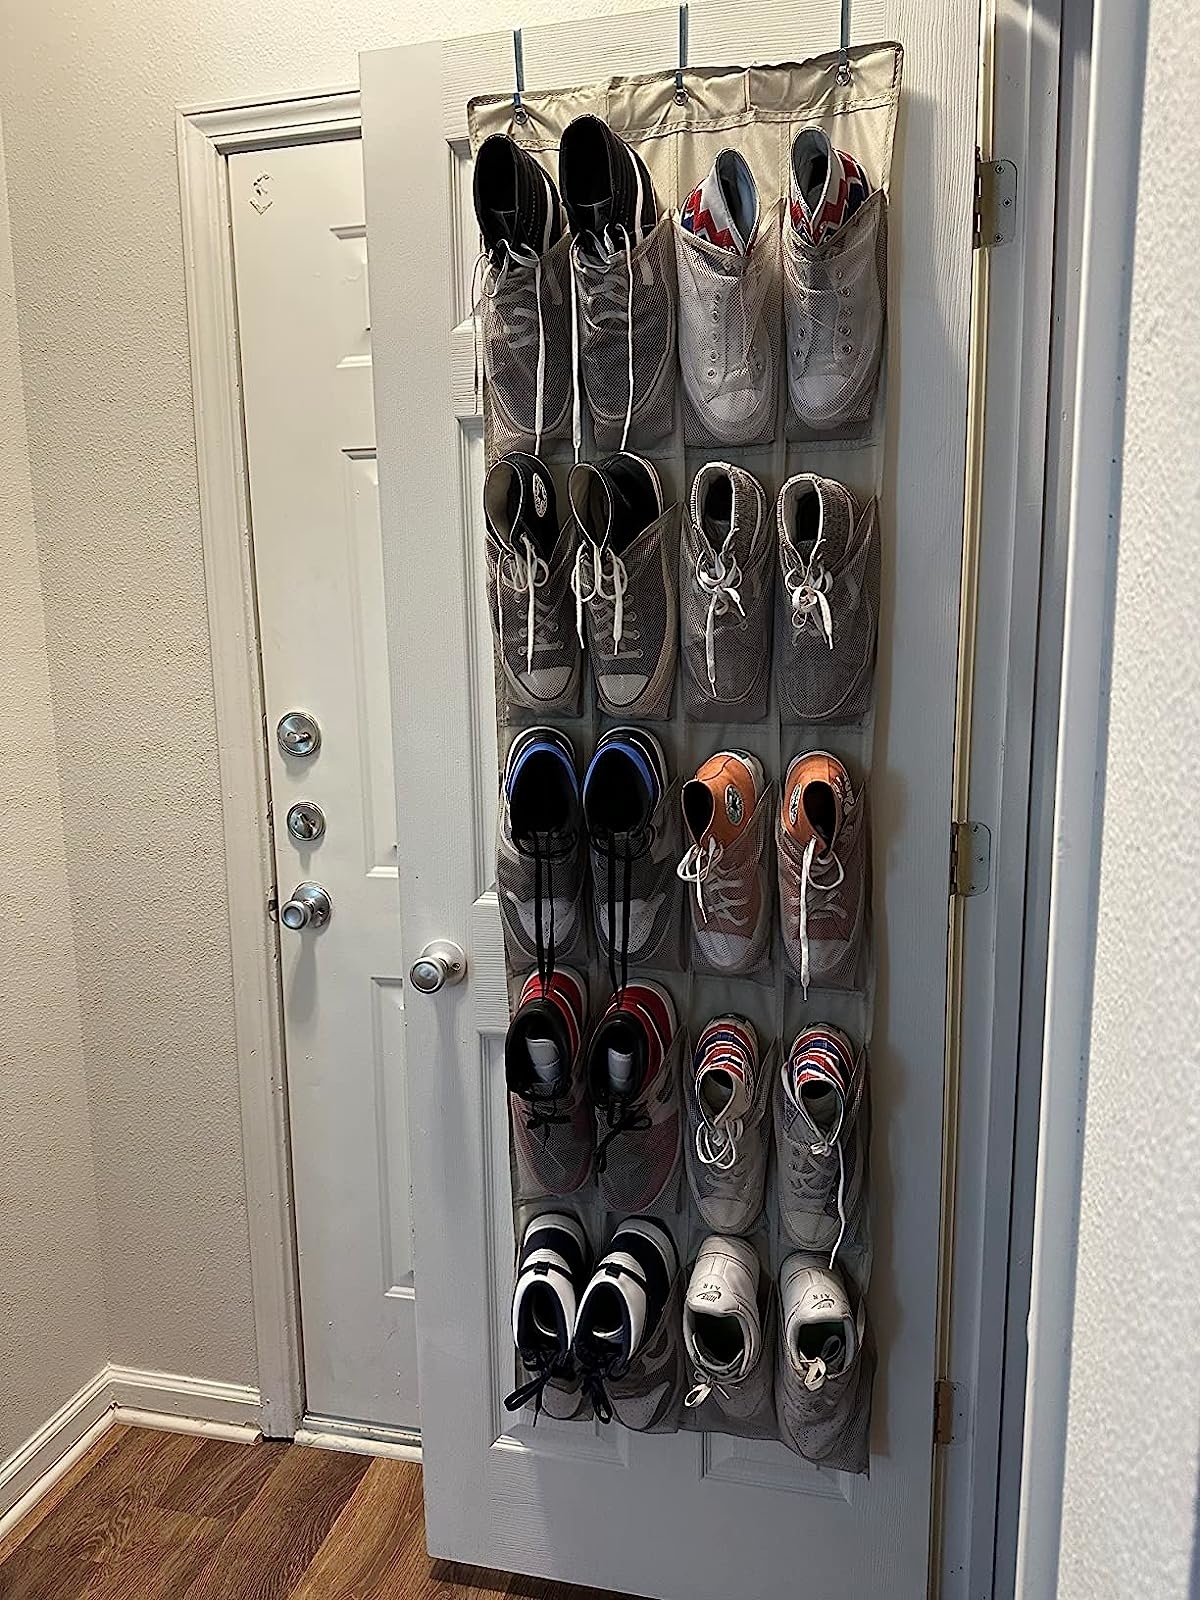 Reviewer image of the organizer filled with shoes hanging on their closet door